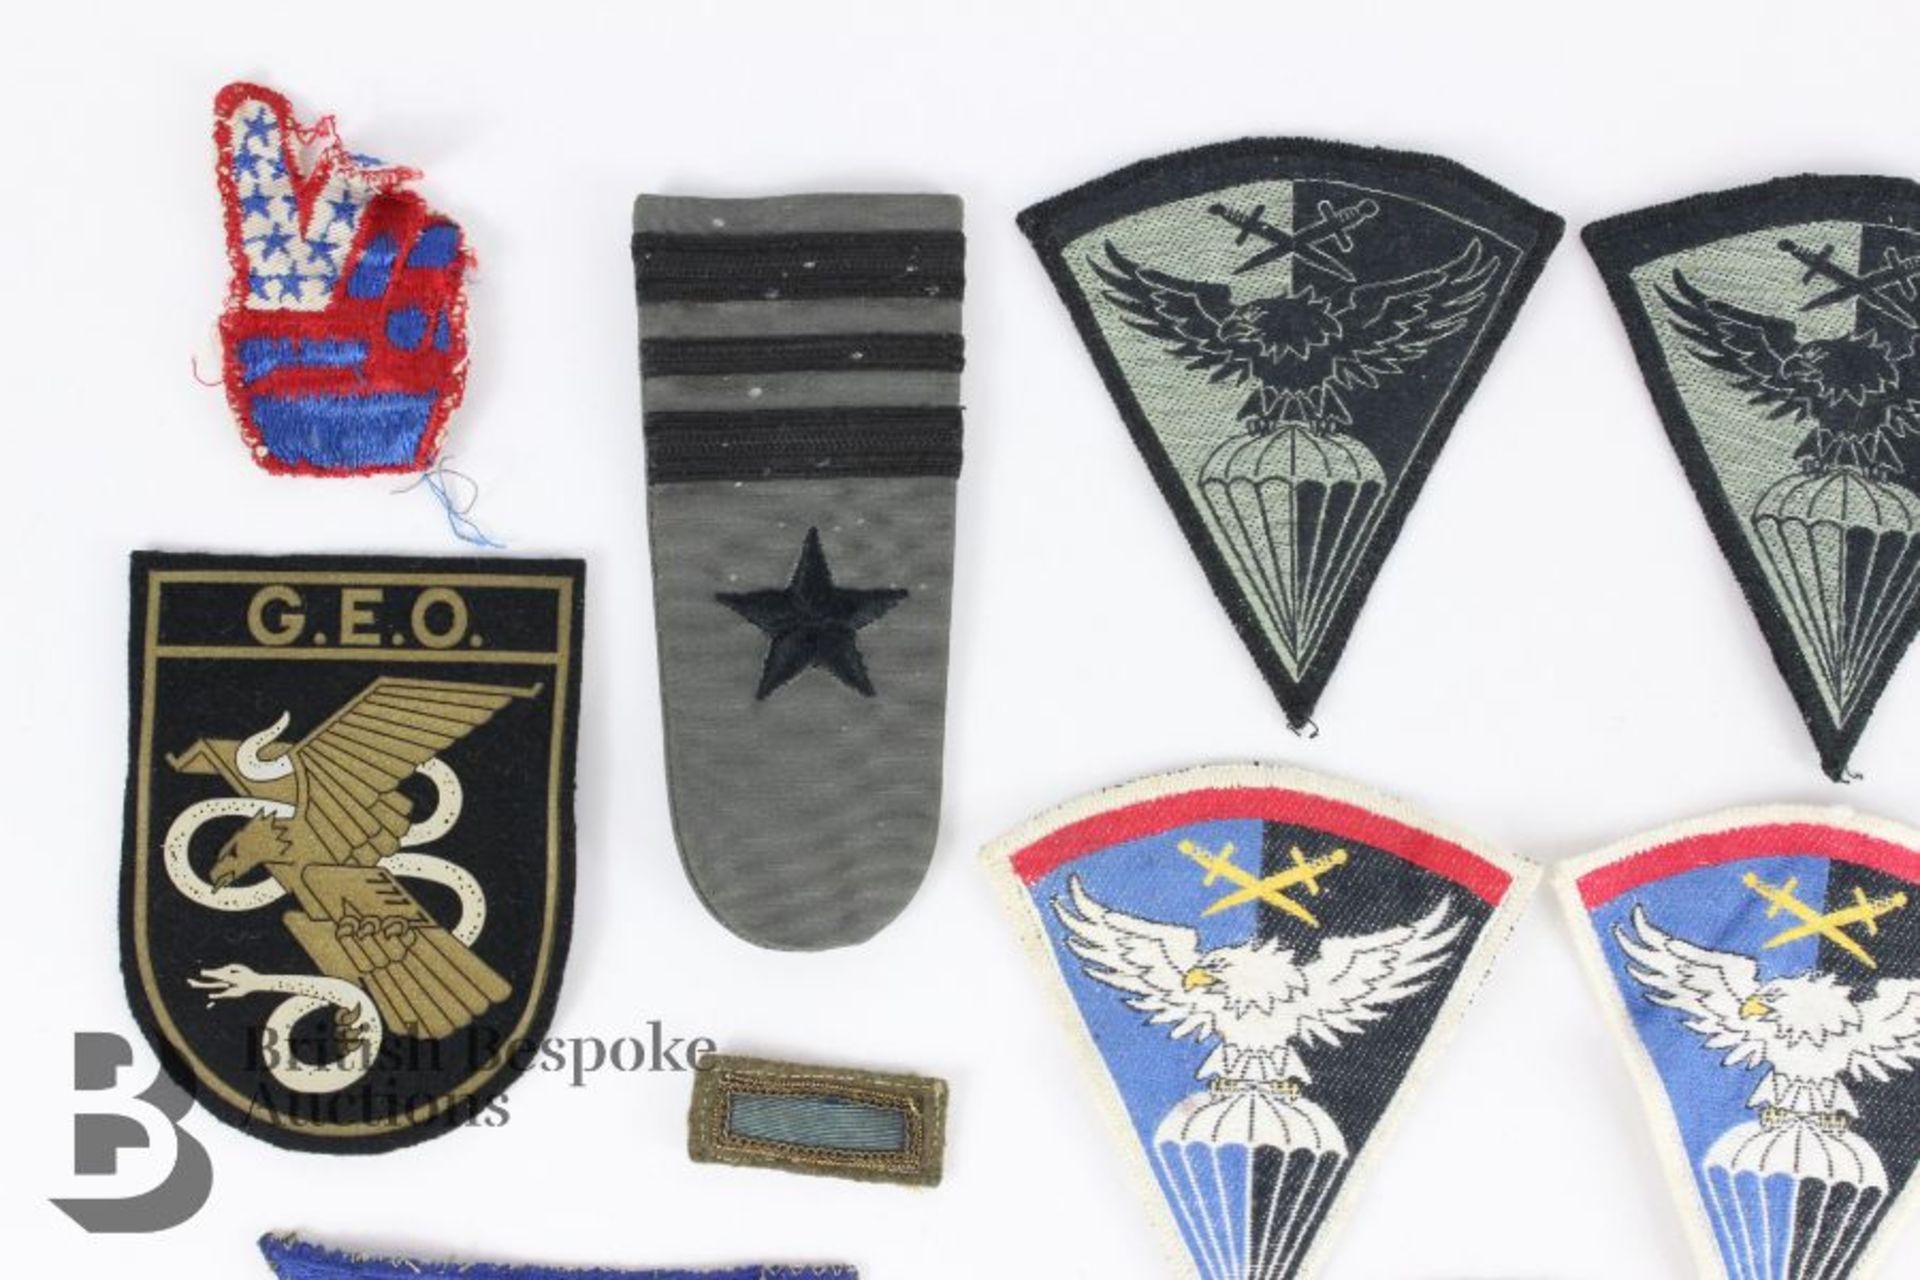 Royal Air Force and Air Training Corps Insignia and Metal Badges, Canadian Airborne Badges - Image 8 of 11